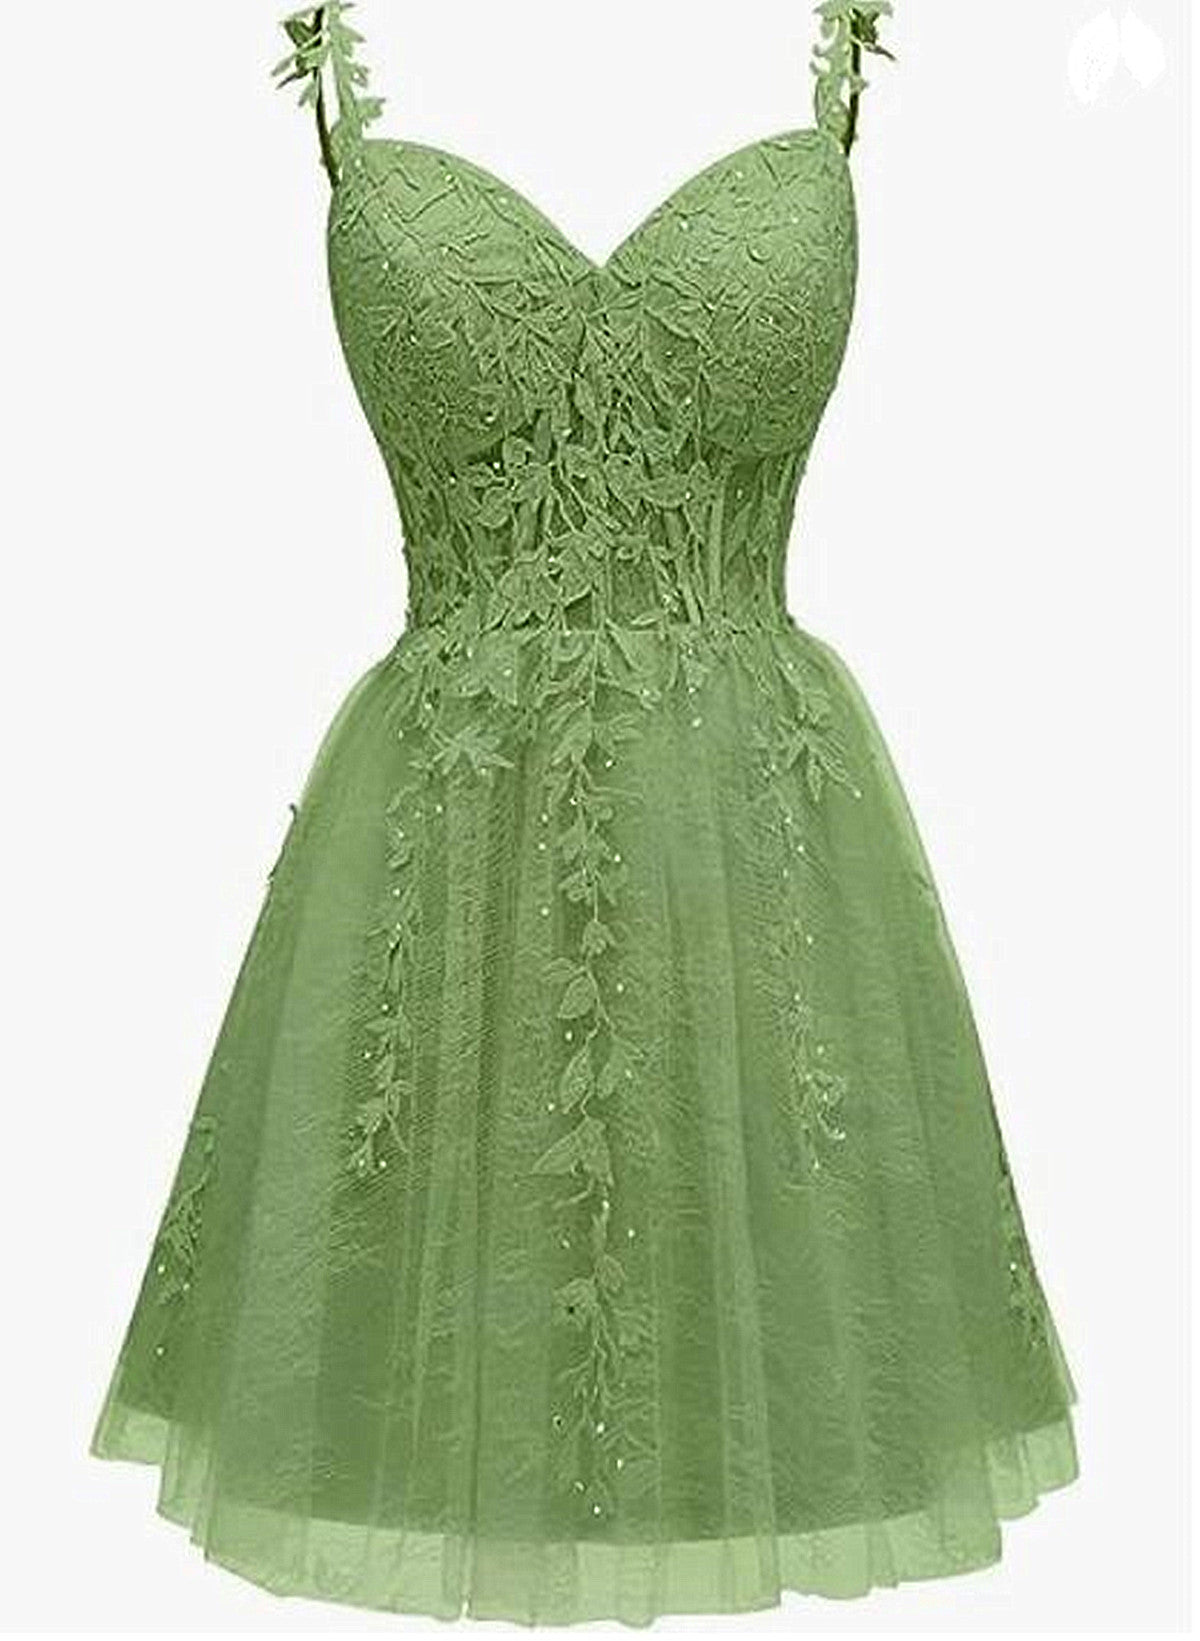 Bridesmaids Dresses Satin, Lovely Green Sweetheart Beaded Straps Party Dress, Green Tulle Homecoming Dress